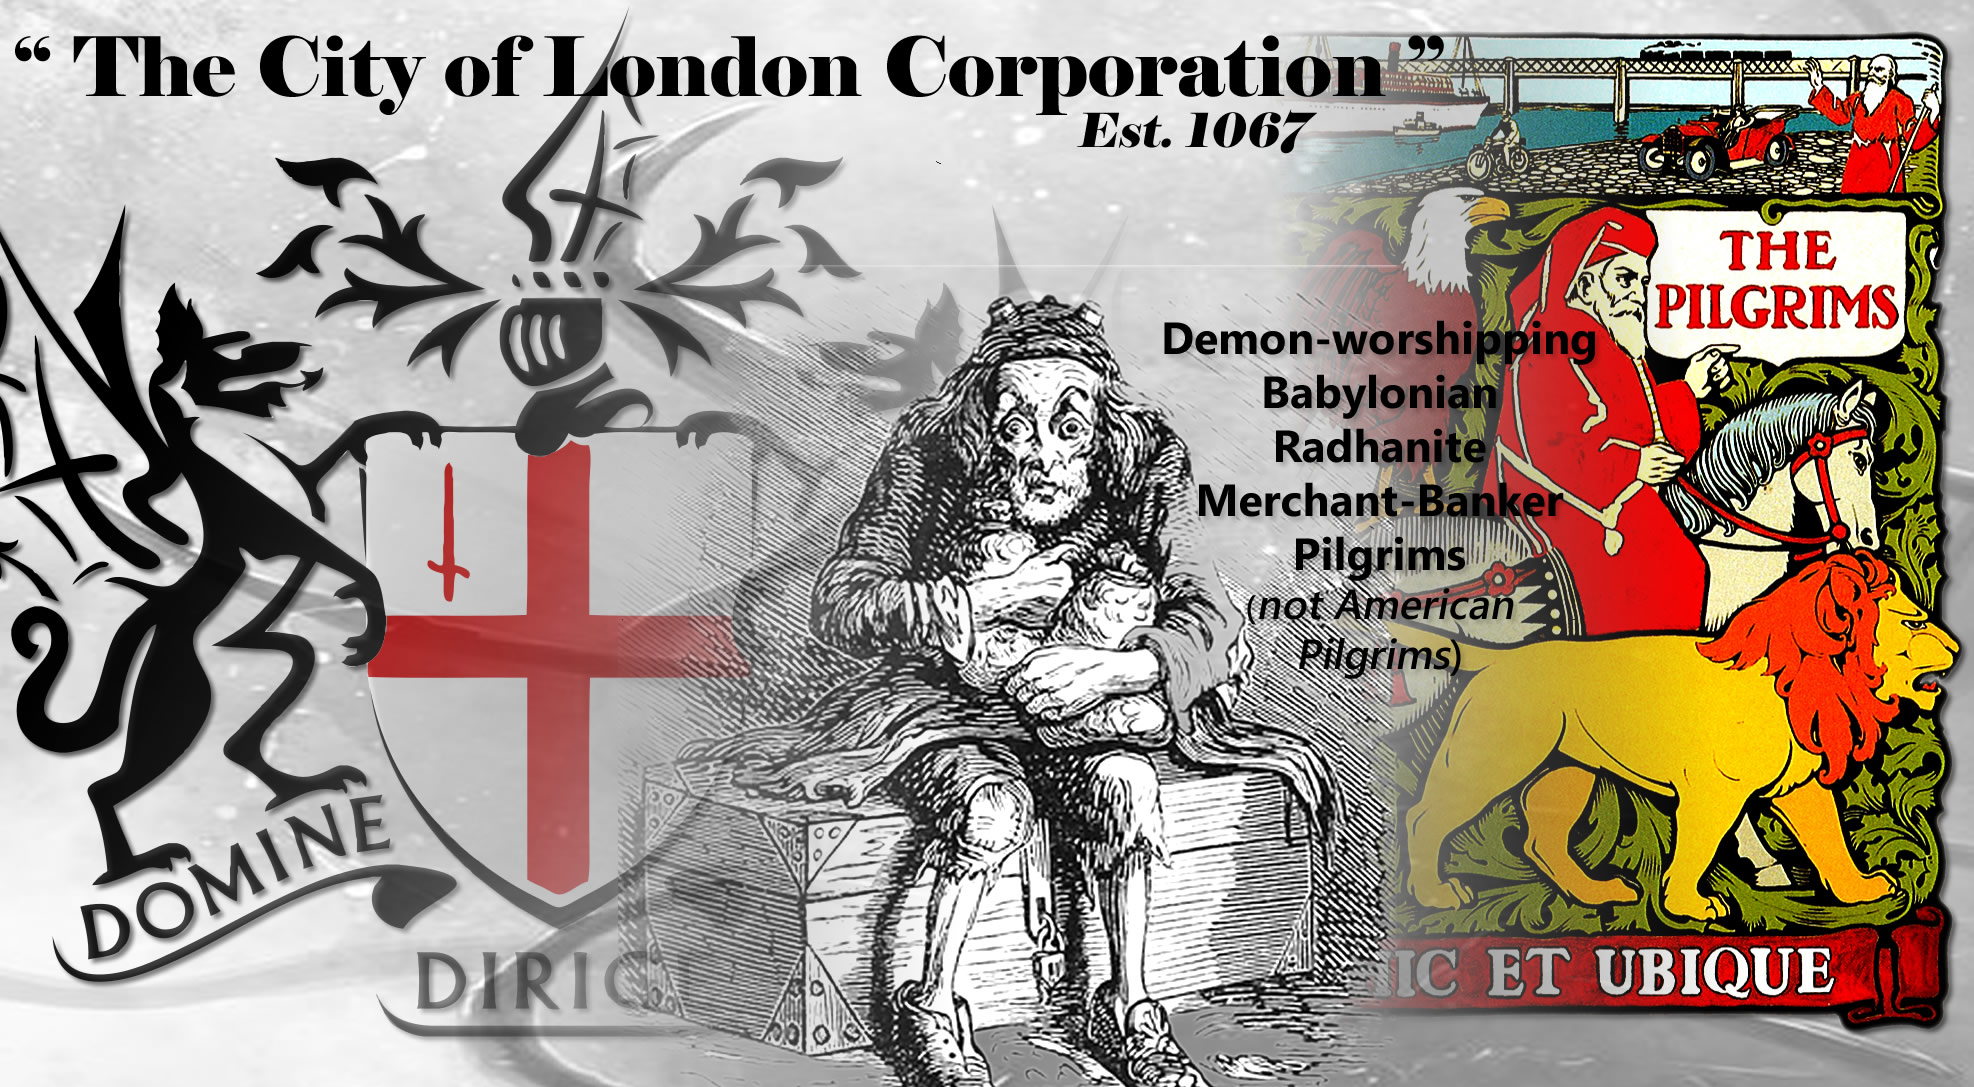 THE CITY OF LONDON BABYLONIAN MERCHANT-BANKER DEMON HOAX OF ALL TIME